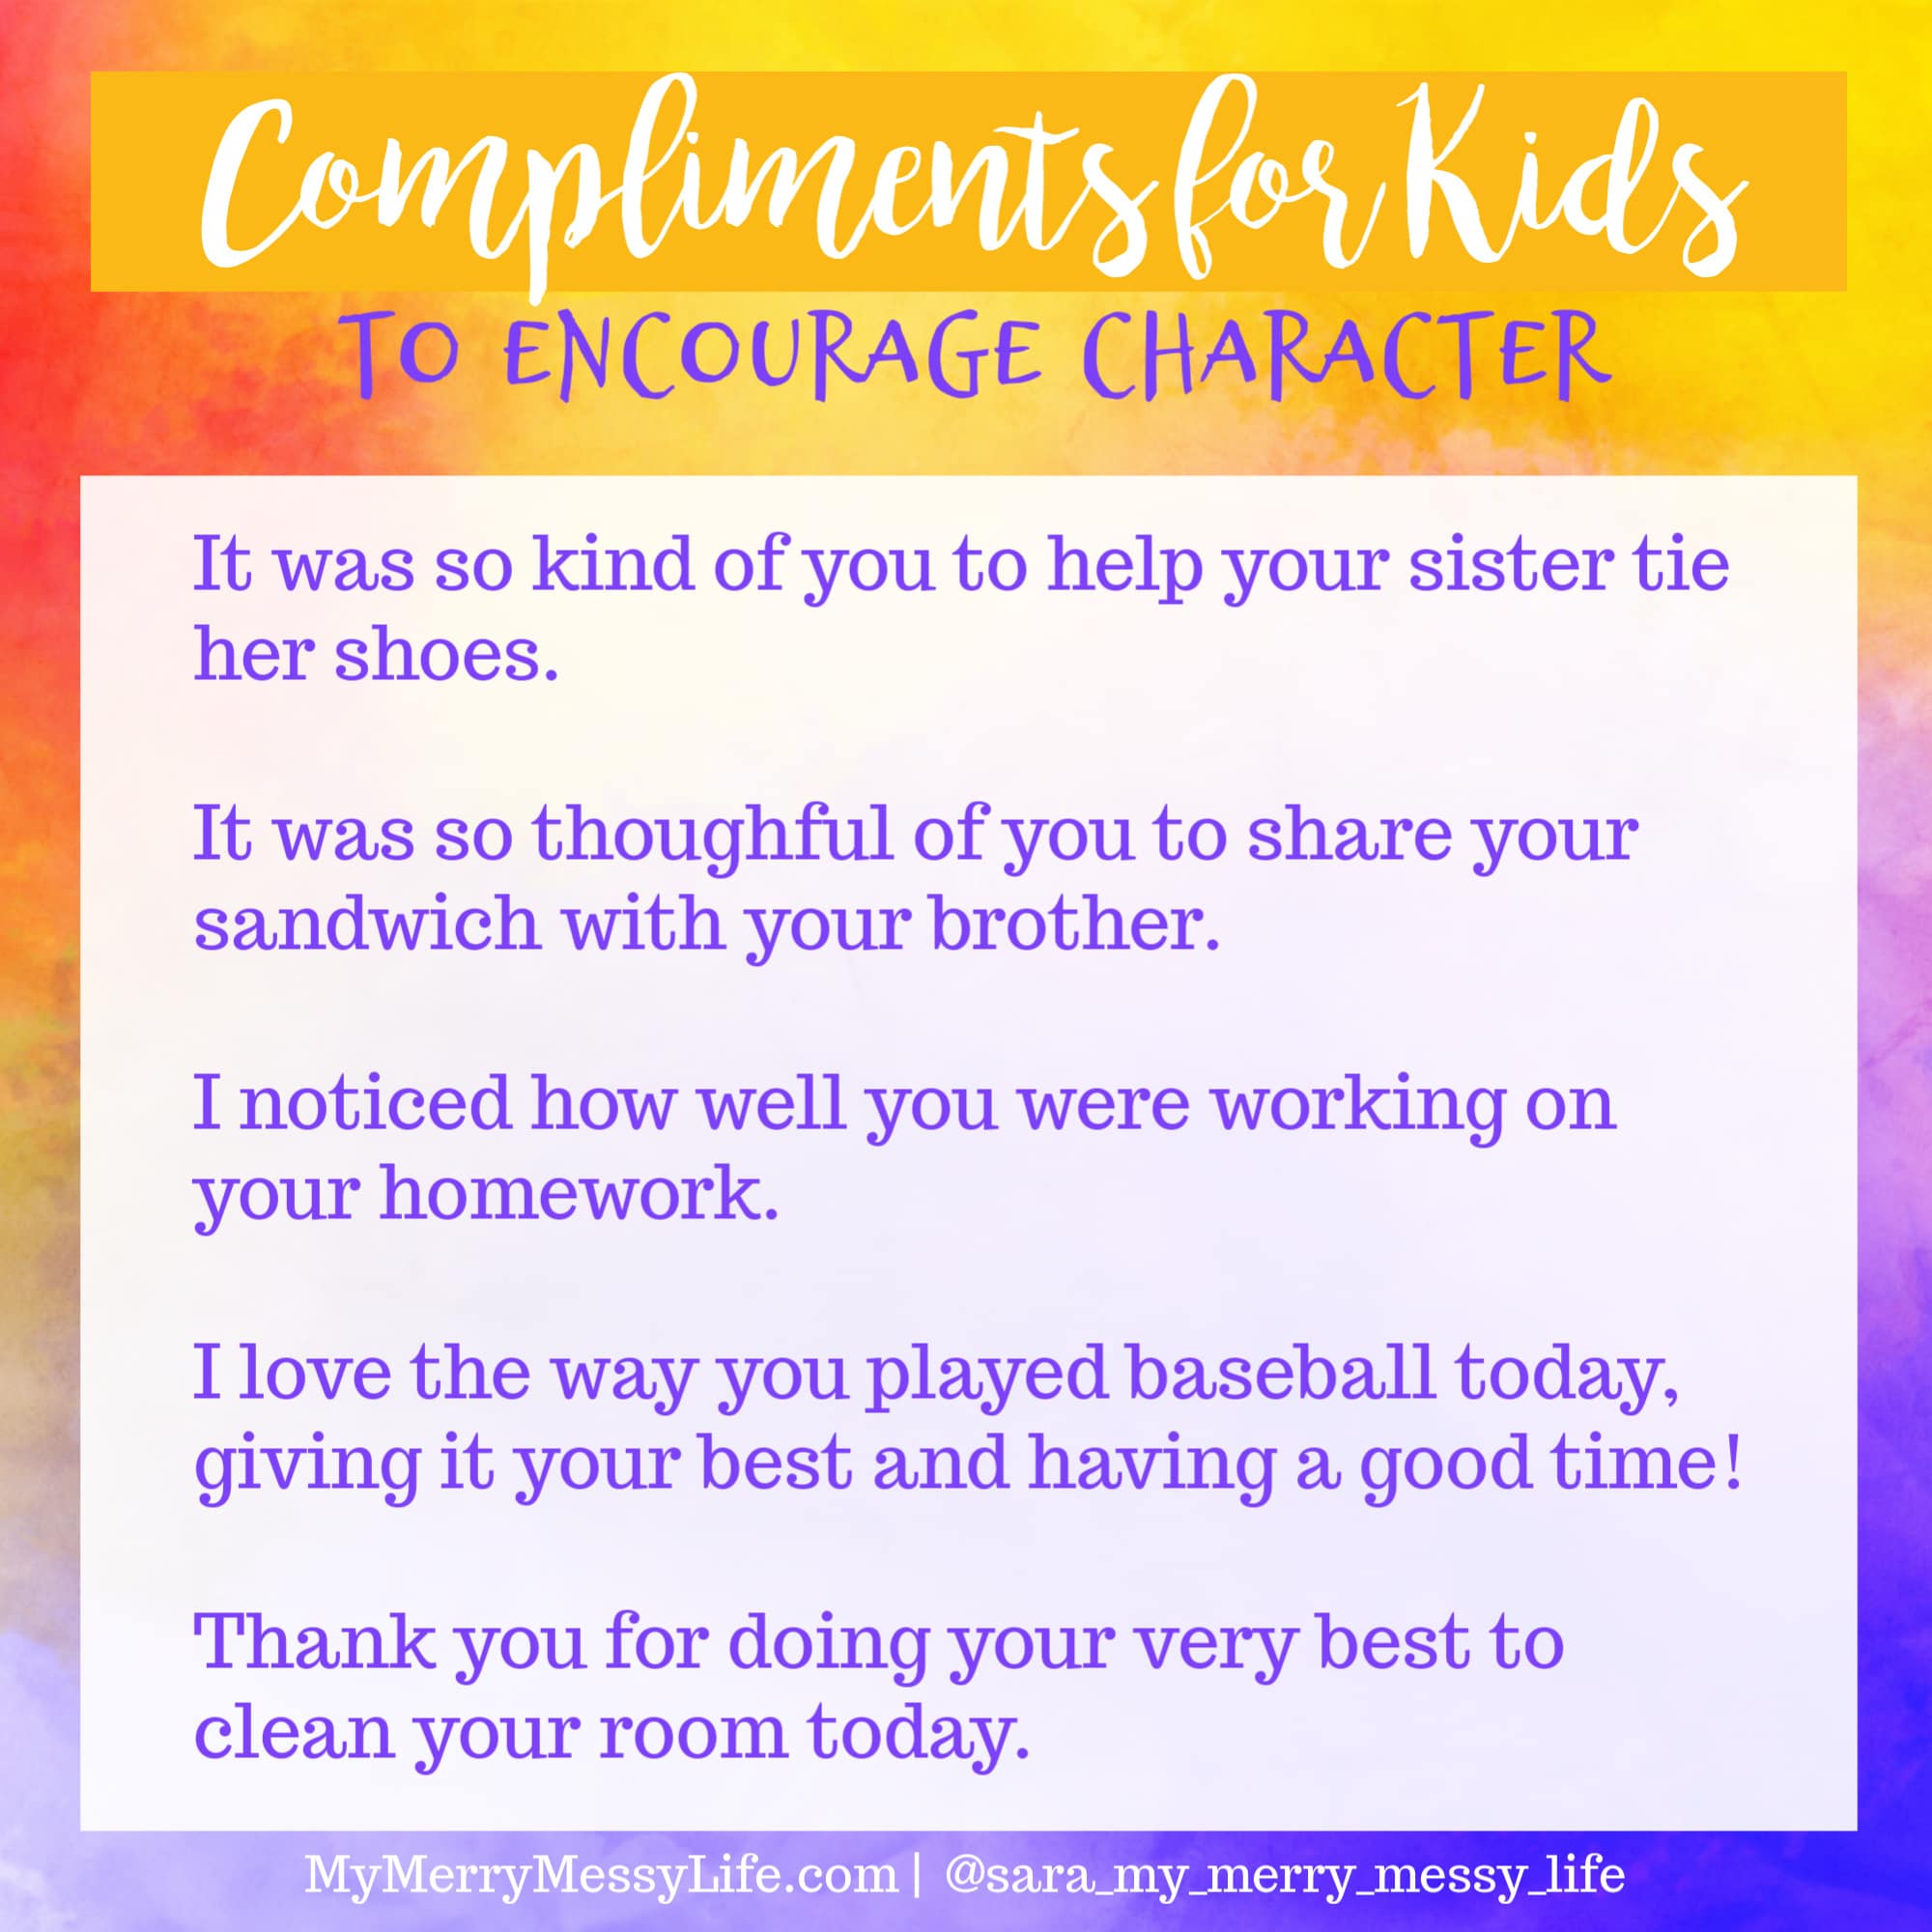 25 Compliments for Kids to Encourage Character - to praise Process over Results